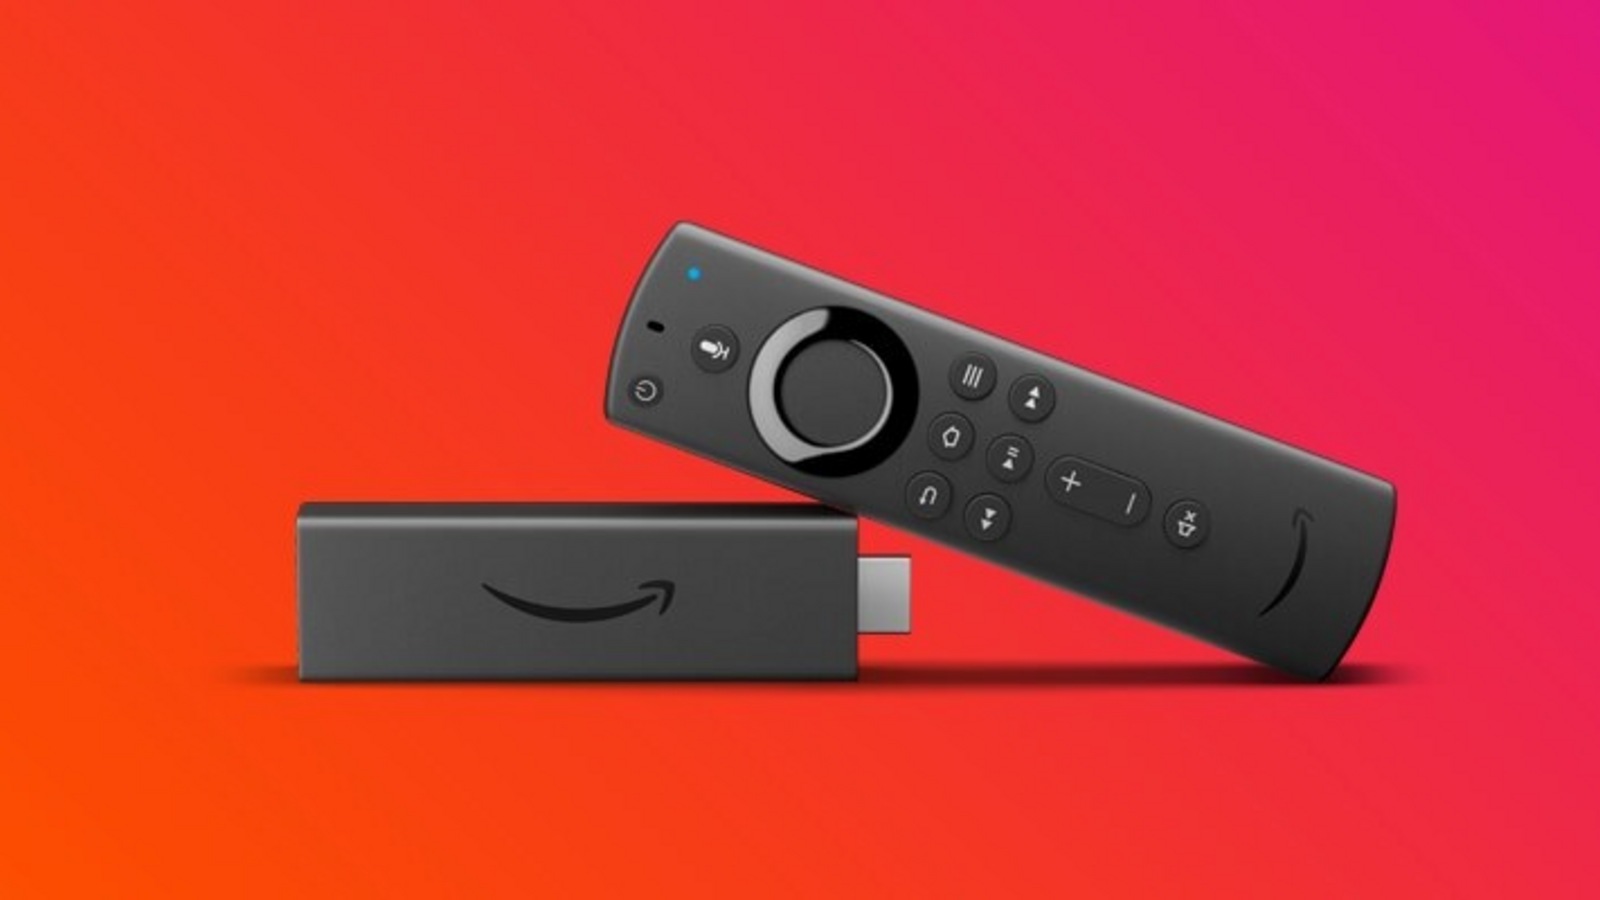 In big step, Amazon to stop using Google Android; Fire TV devices will be the first ones to get new OS